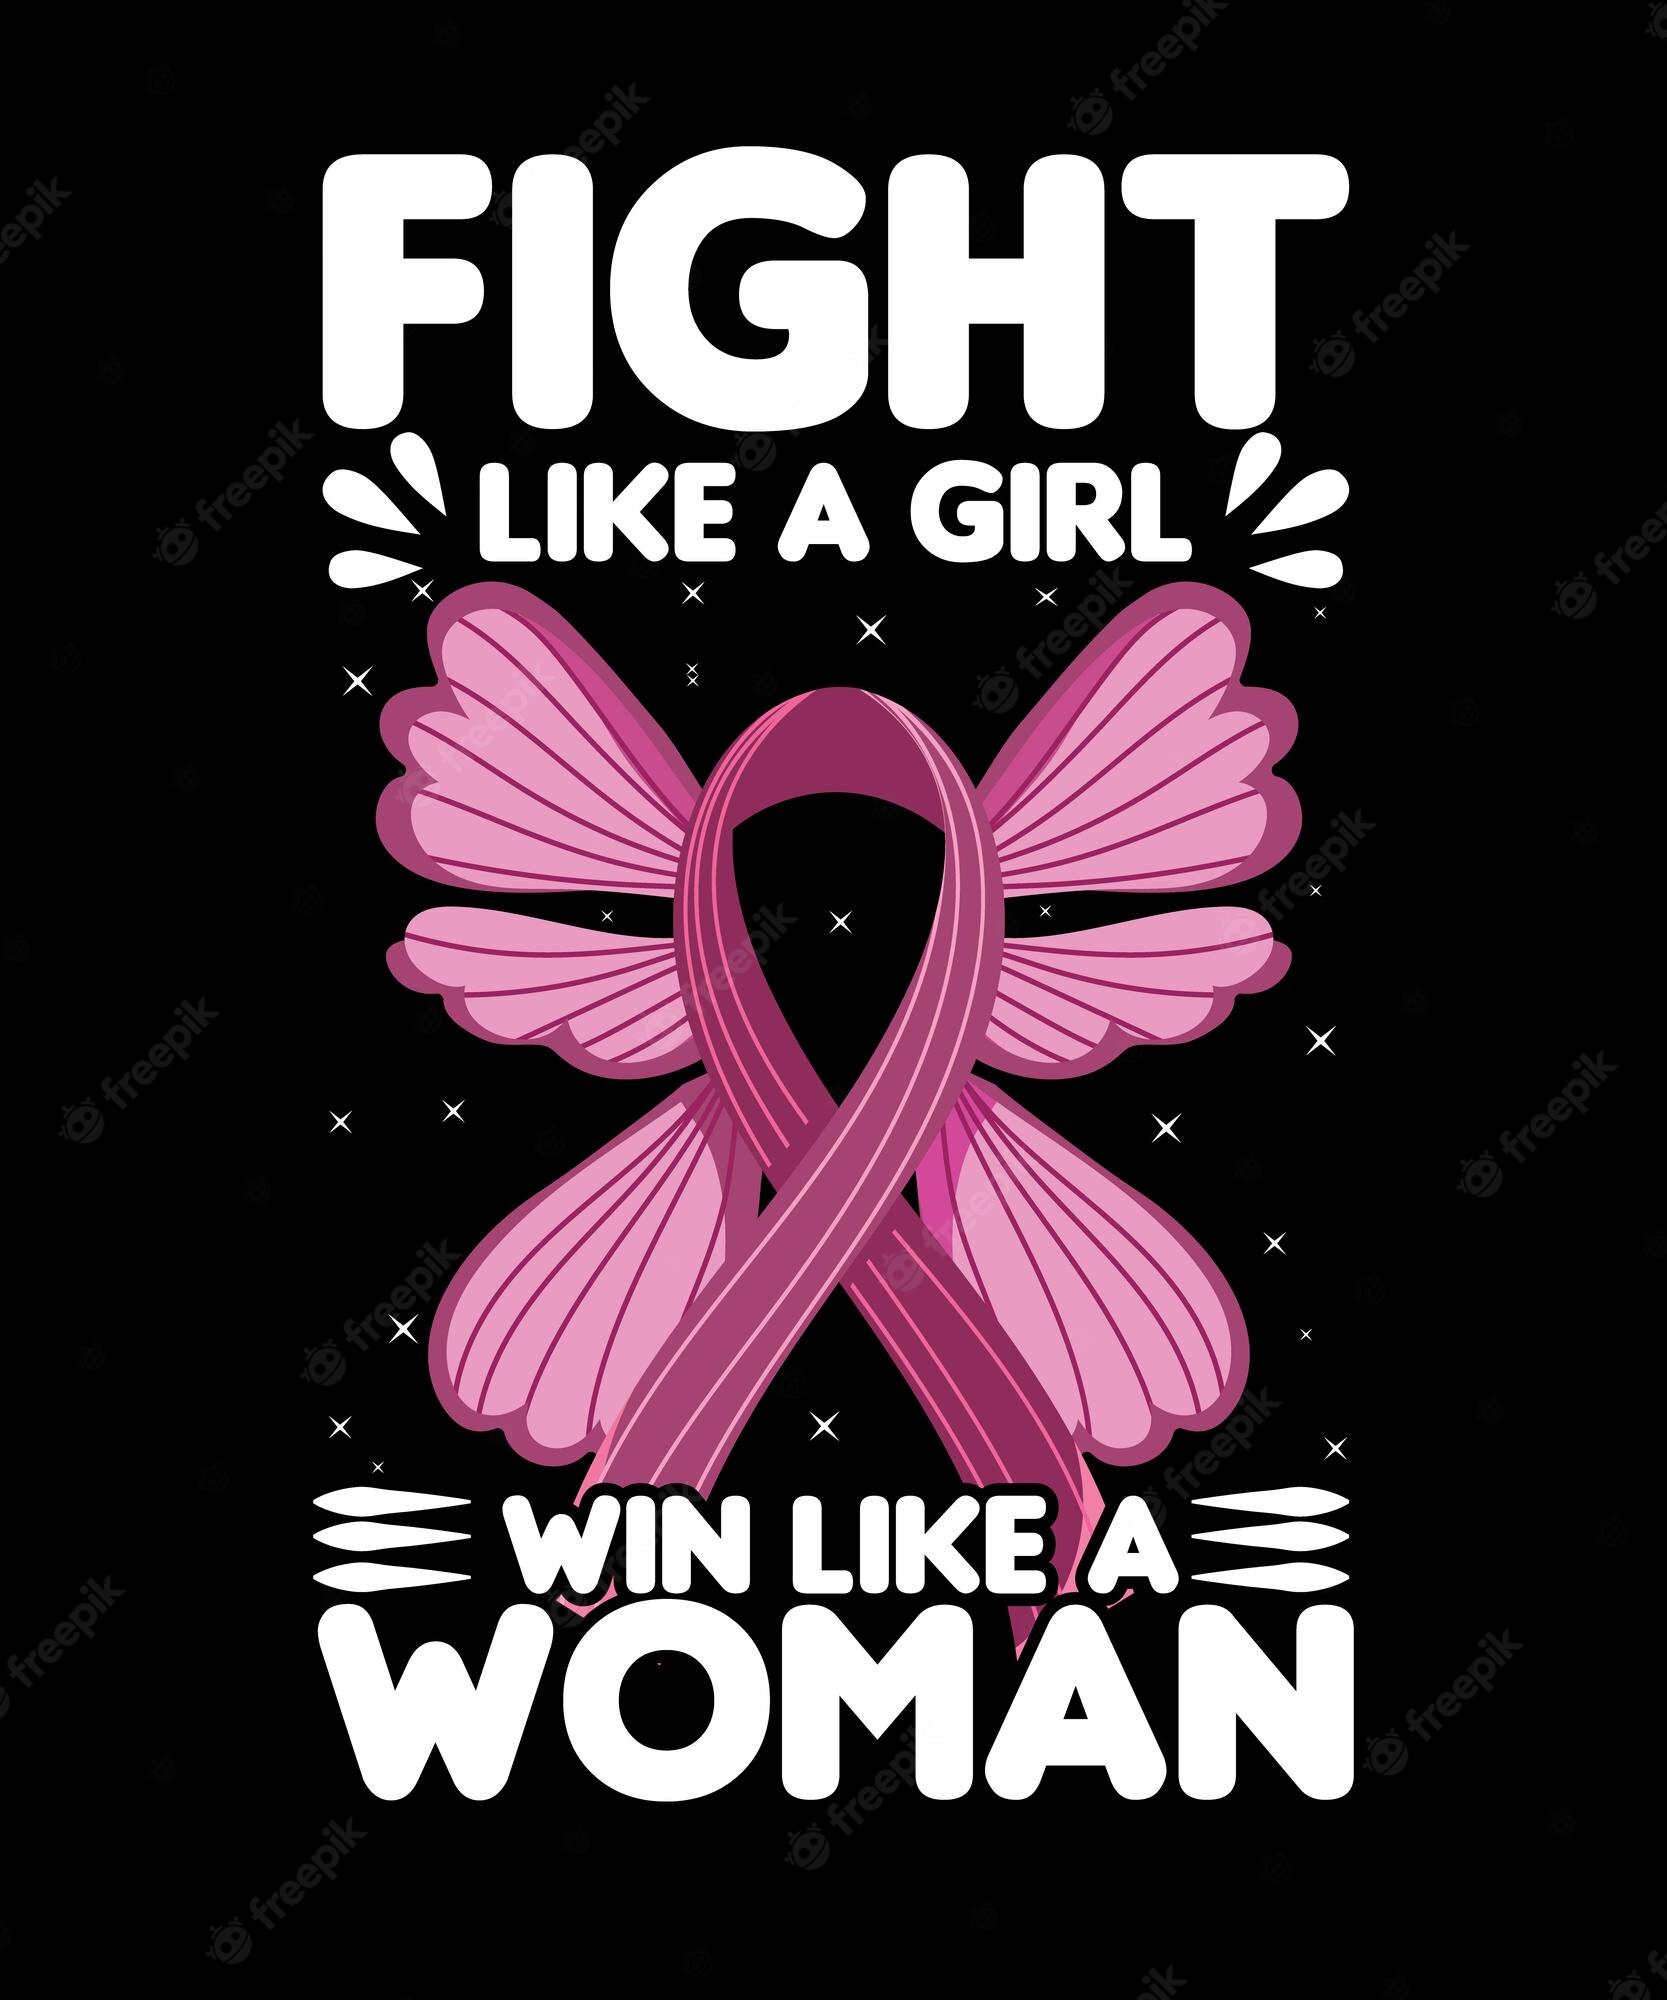 Feminism Is Cancer Wallpapers